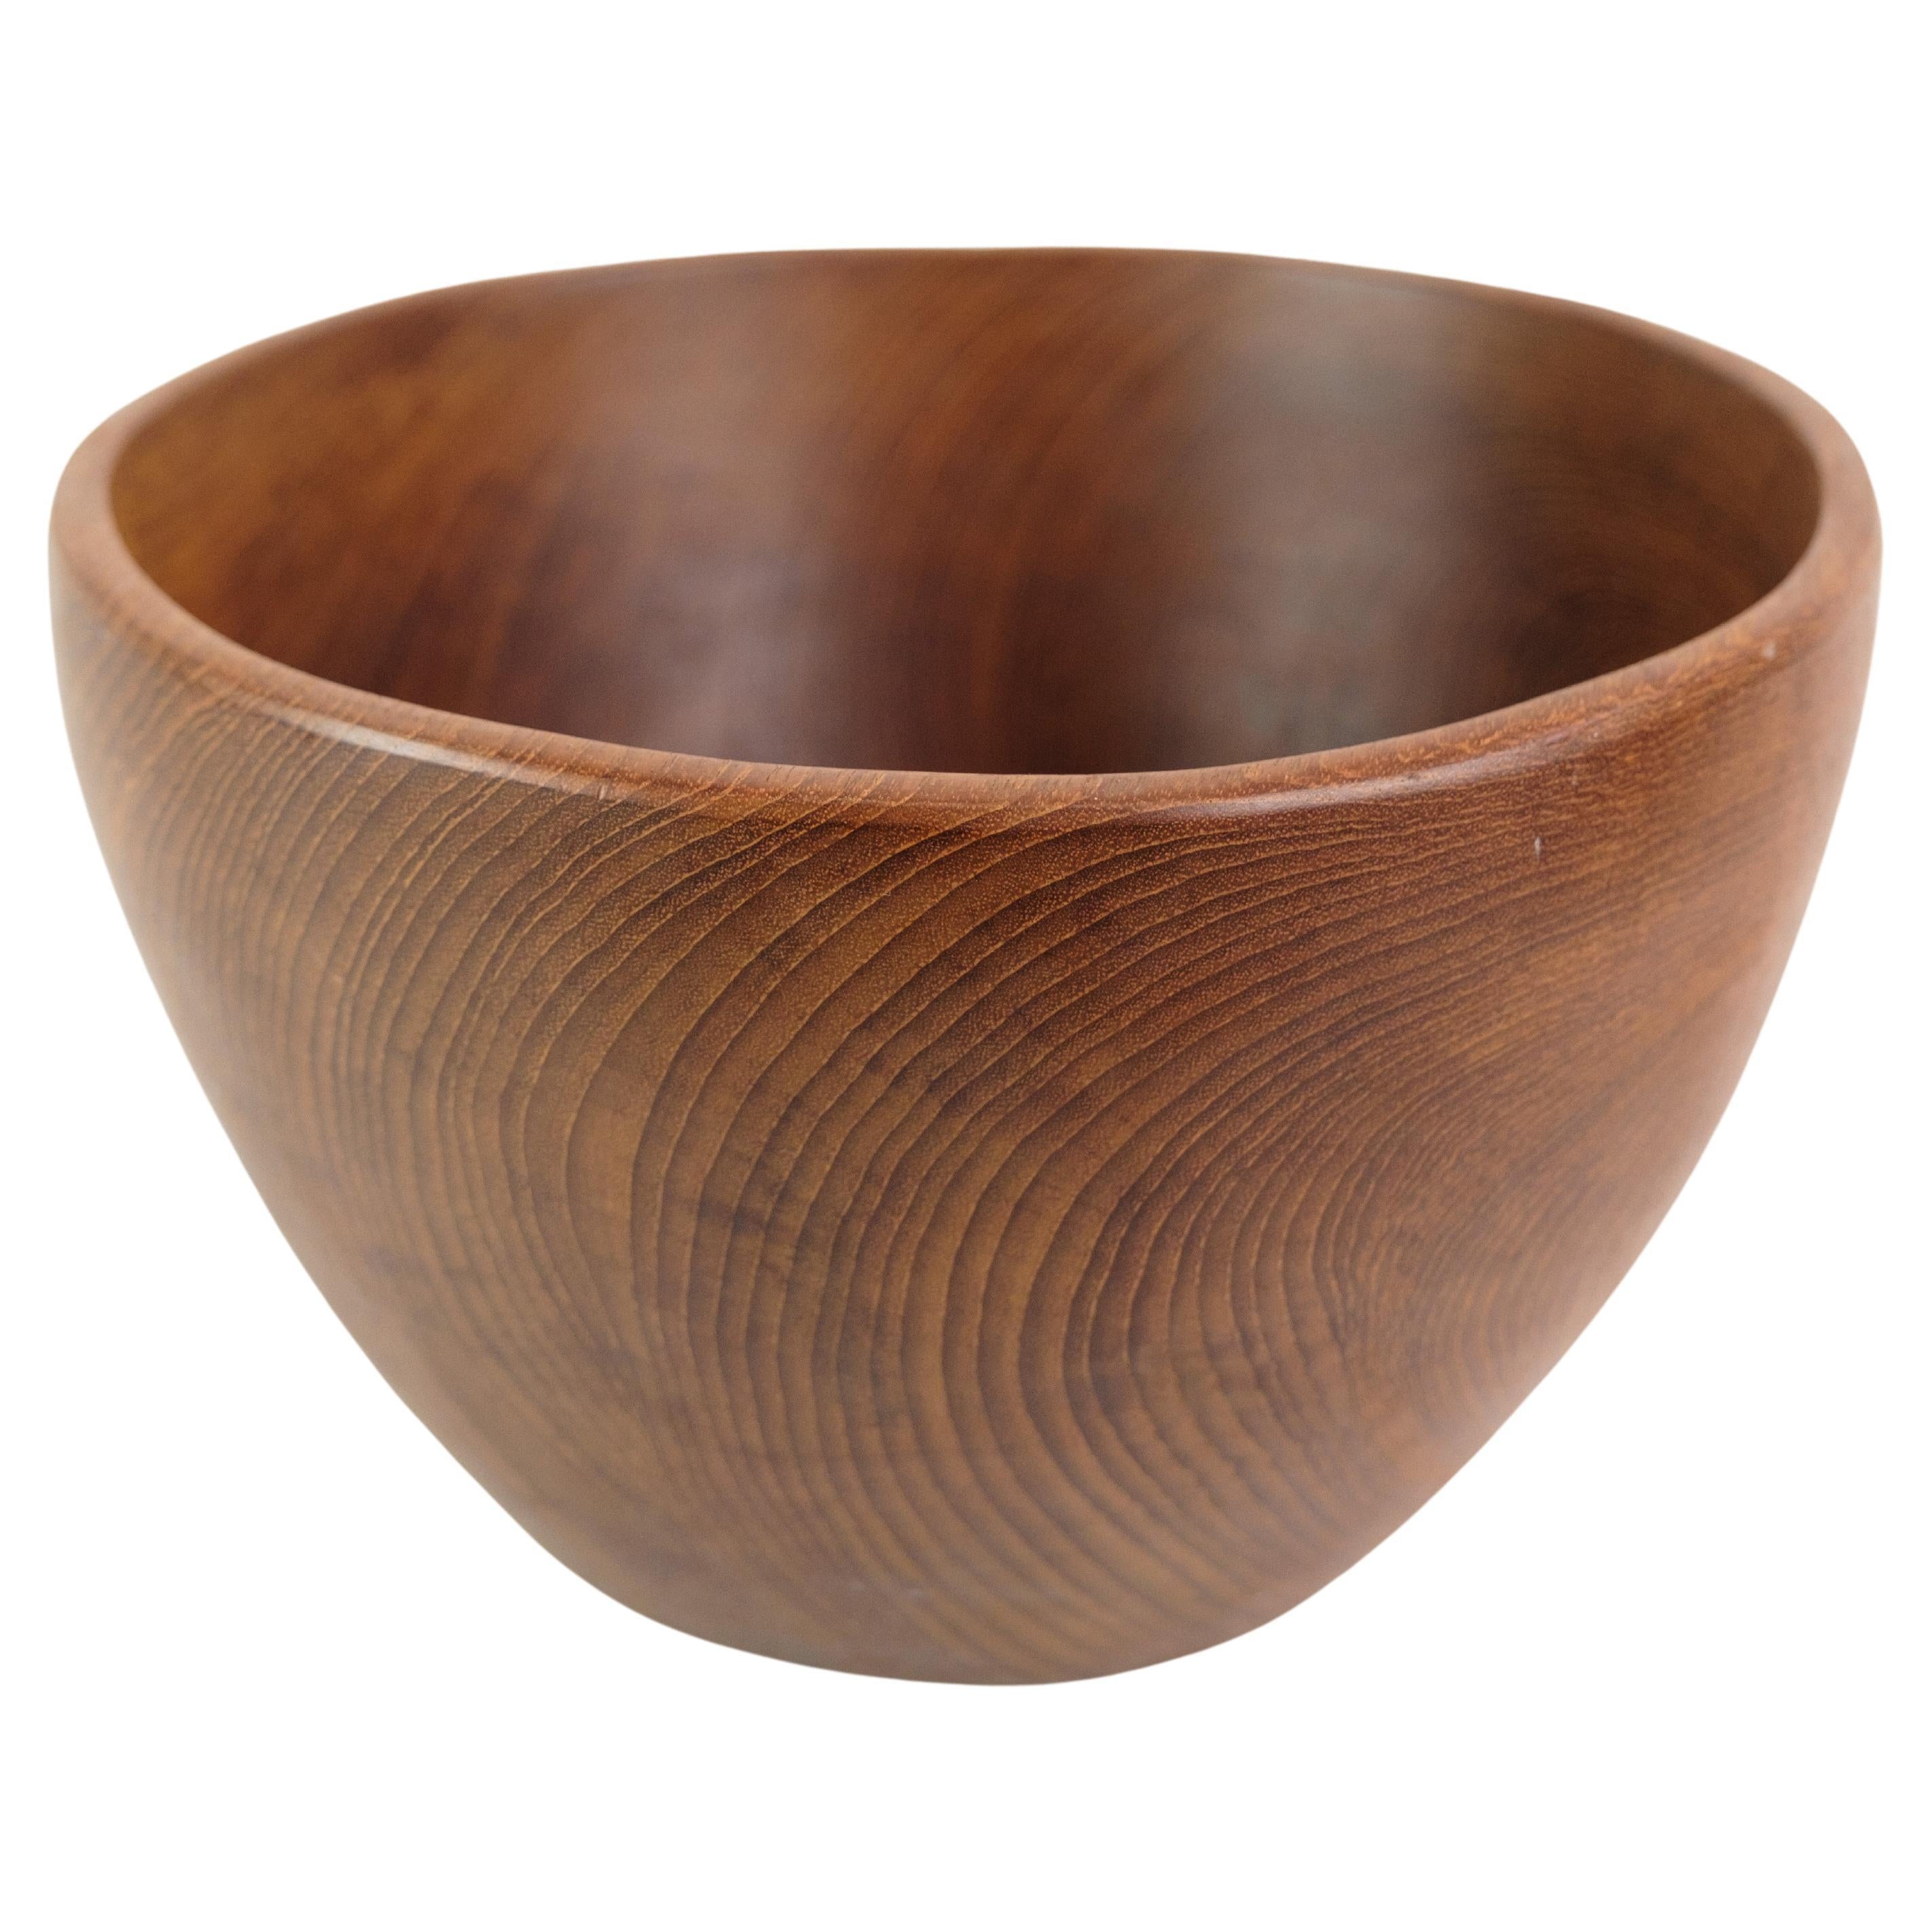 Bowl Made In Teak, Danish Design From 1960s For Sale